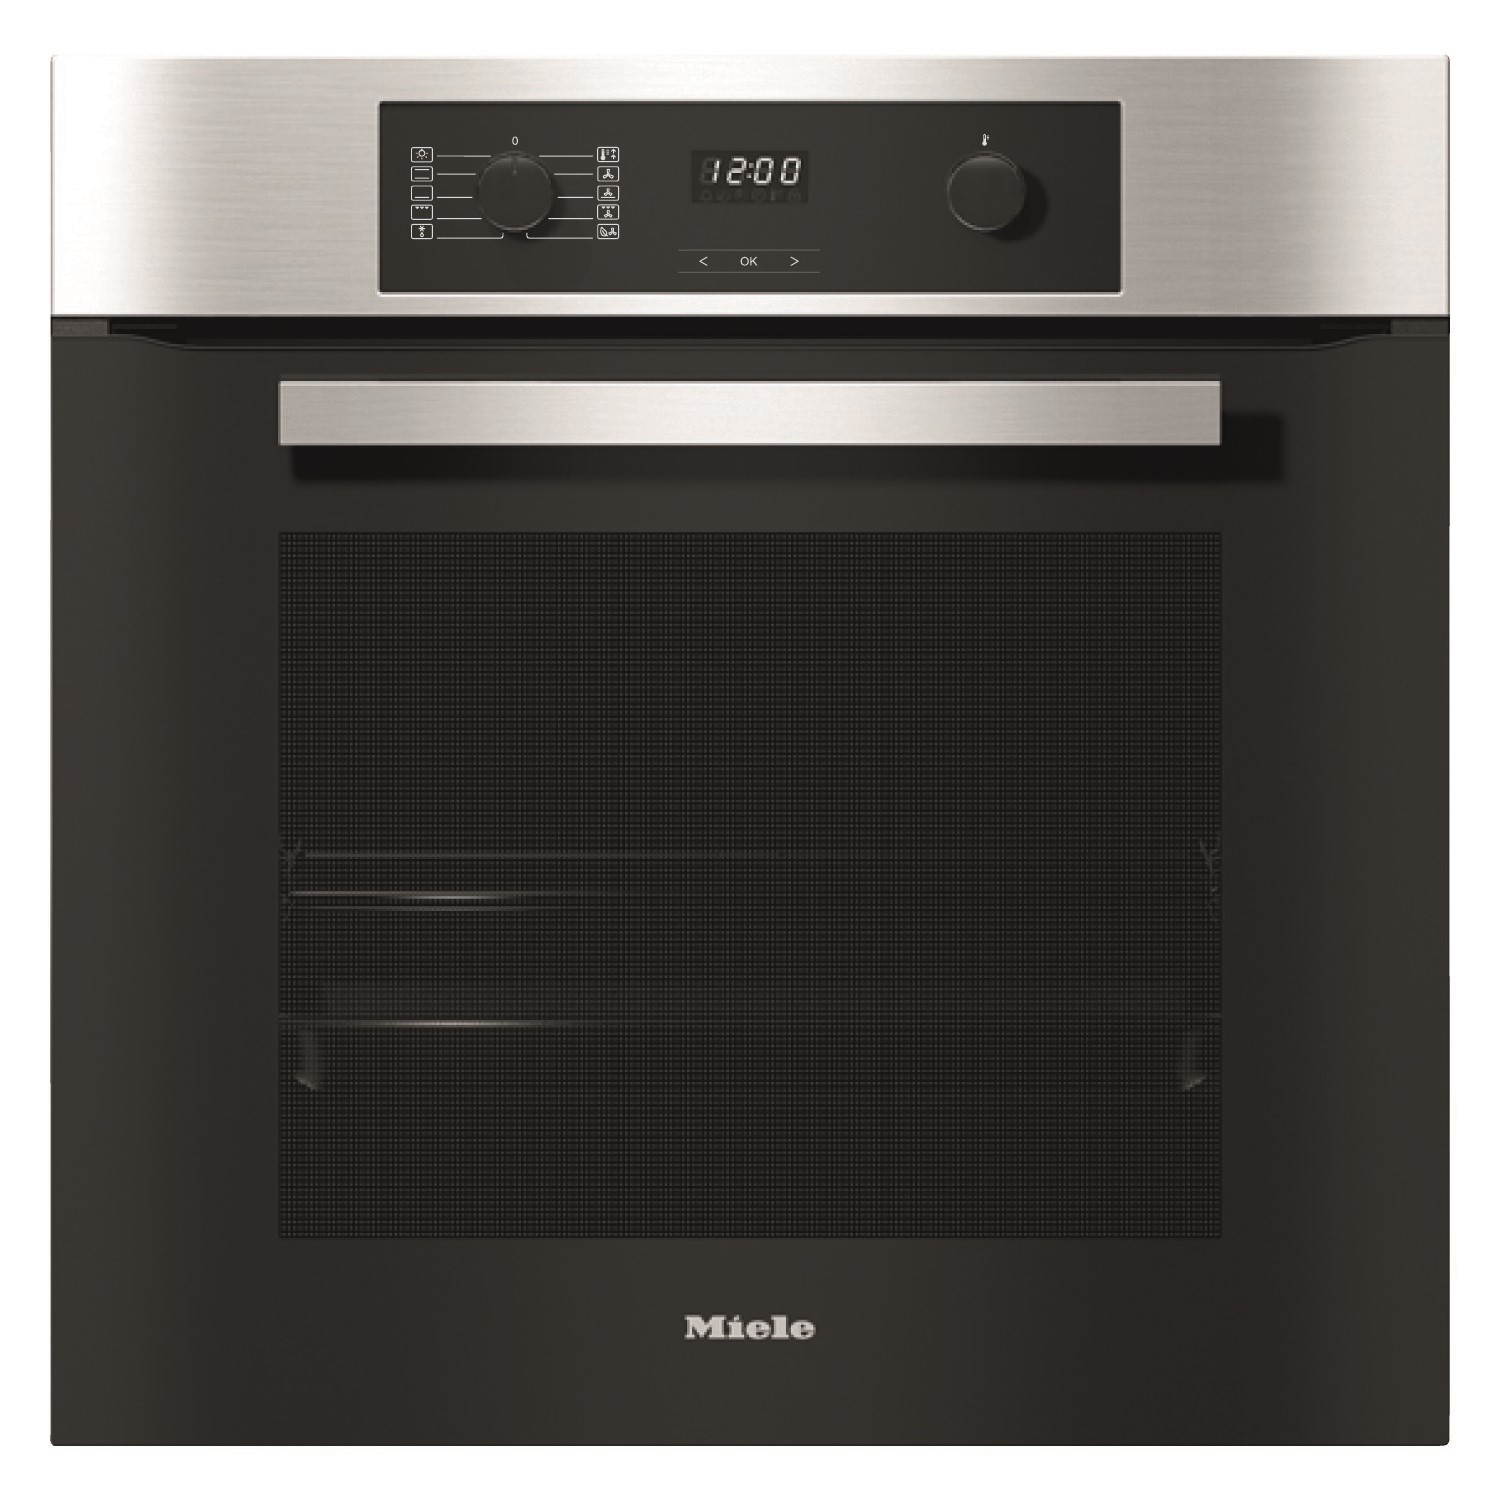 Miele Large Capacity Single Oven - Clean Steel